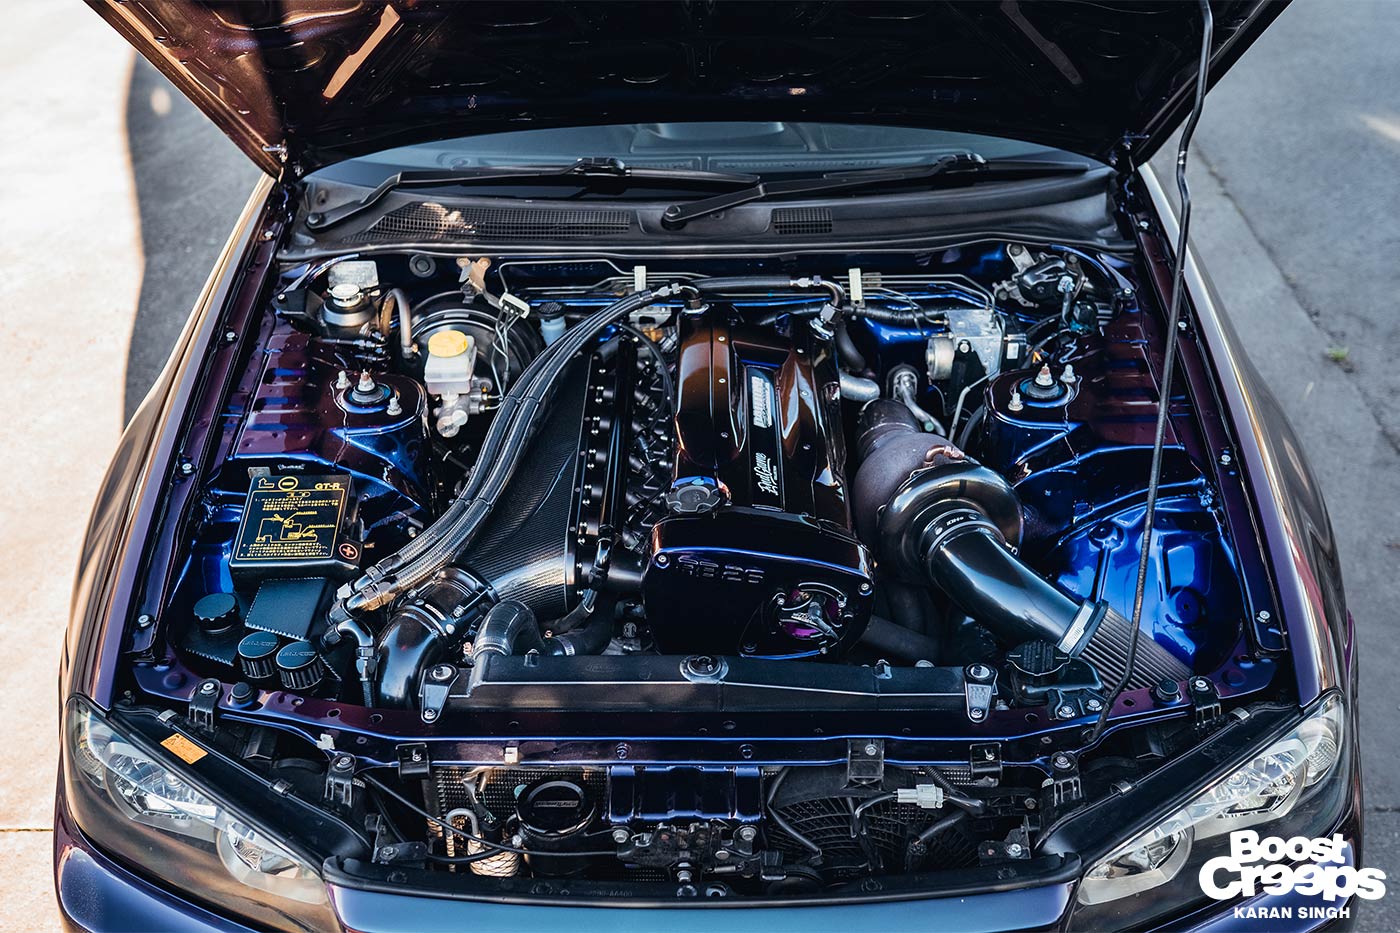 Modified R34 GTR engine bay, featuring a single turbo